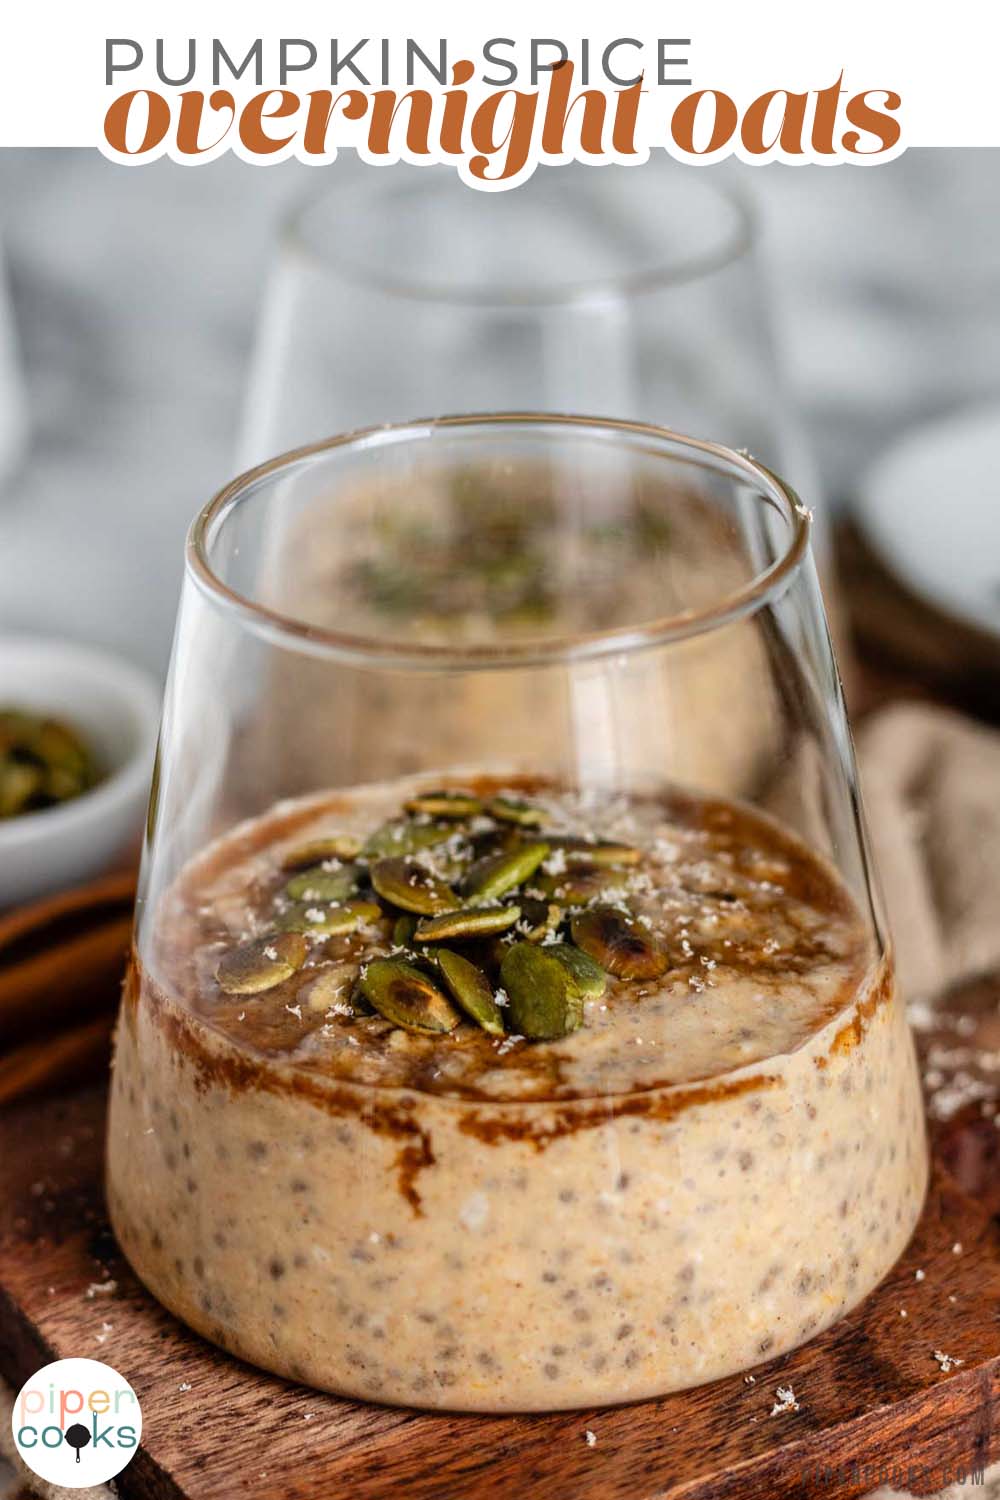 Oats in a glass cup with syrup and pumpkin seeds on top with text title for pinterest.